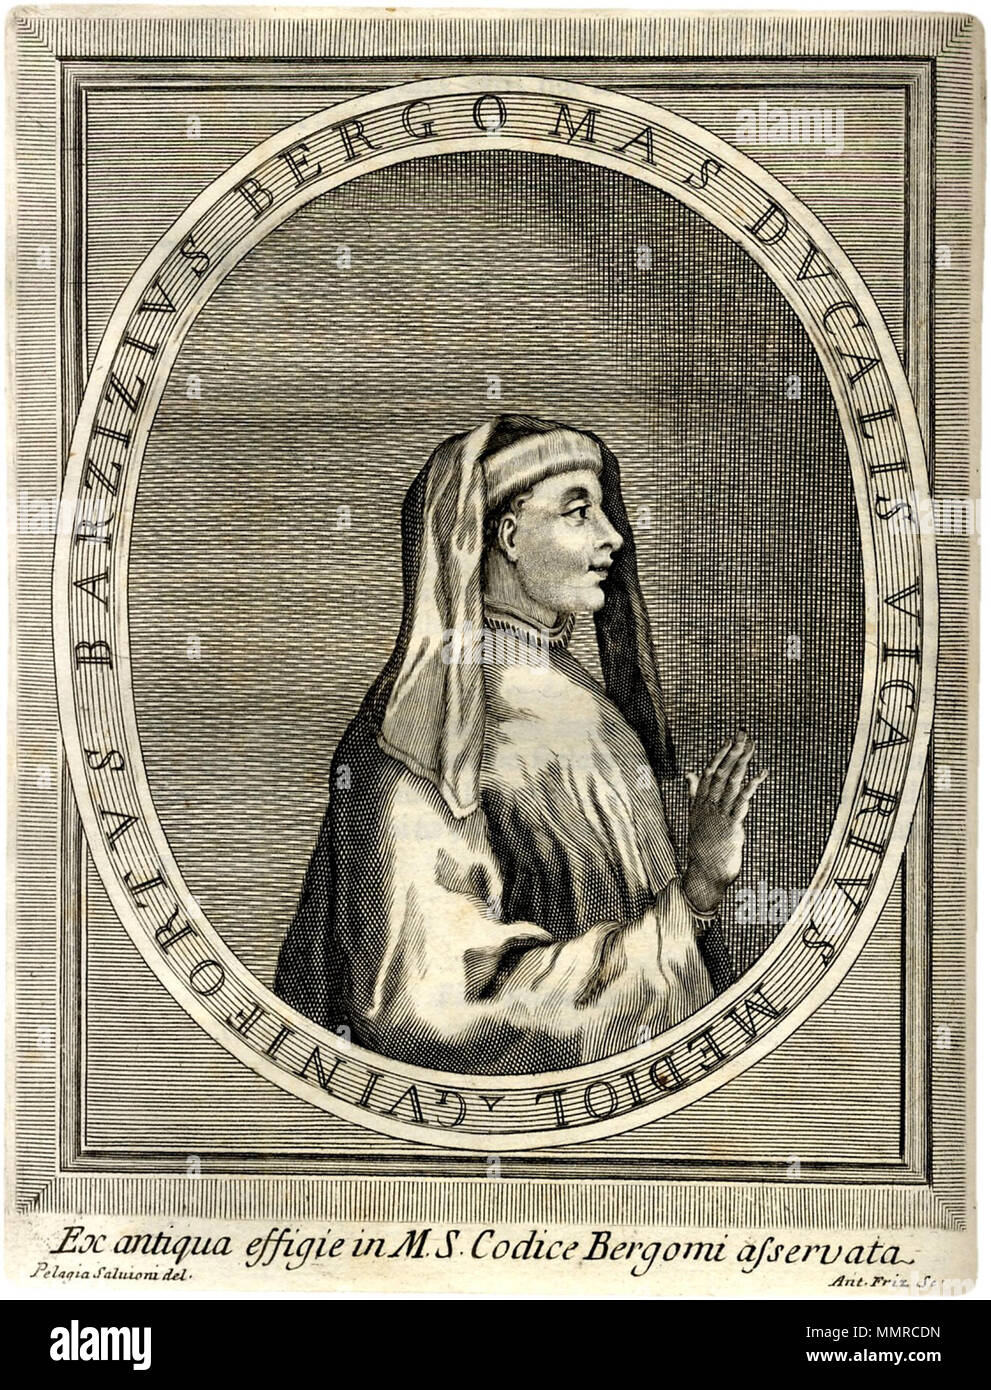 . English: Portrait of Guiniforte Barzizza (Pavia, 1406 - Milan, 1463), Italian humanist scholar and teacher of Galeazzo Maria and Ippolita Maria Sforza. An earlier version of this engraving was published in Scena letteraria de gli scrittori bergamaschi in 1664. This reversed copy was made for the 1723 Gasparini Barzizii Bergomatis Et Guiniforti Filii Opera, and a copy was made in 1783 by Vincenzo Angelo Orelli, in oil on canvas.  . Publ. 1723.. Designed by Salvioni; engraved by Anton Fritz. Barzizza-guiniforte-salvioni-anton-fritz-1723 Stock Photo